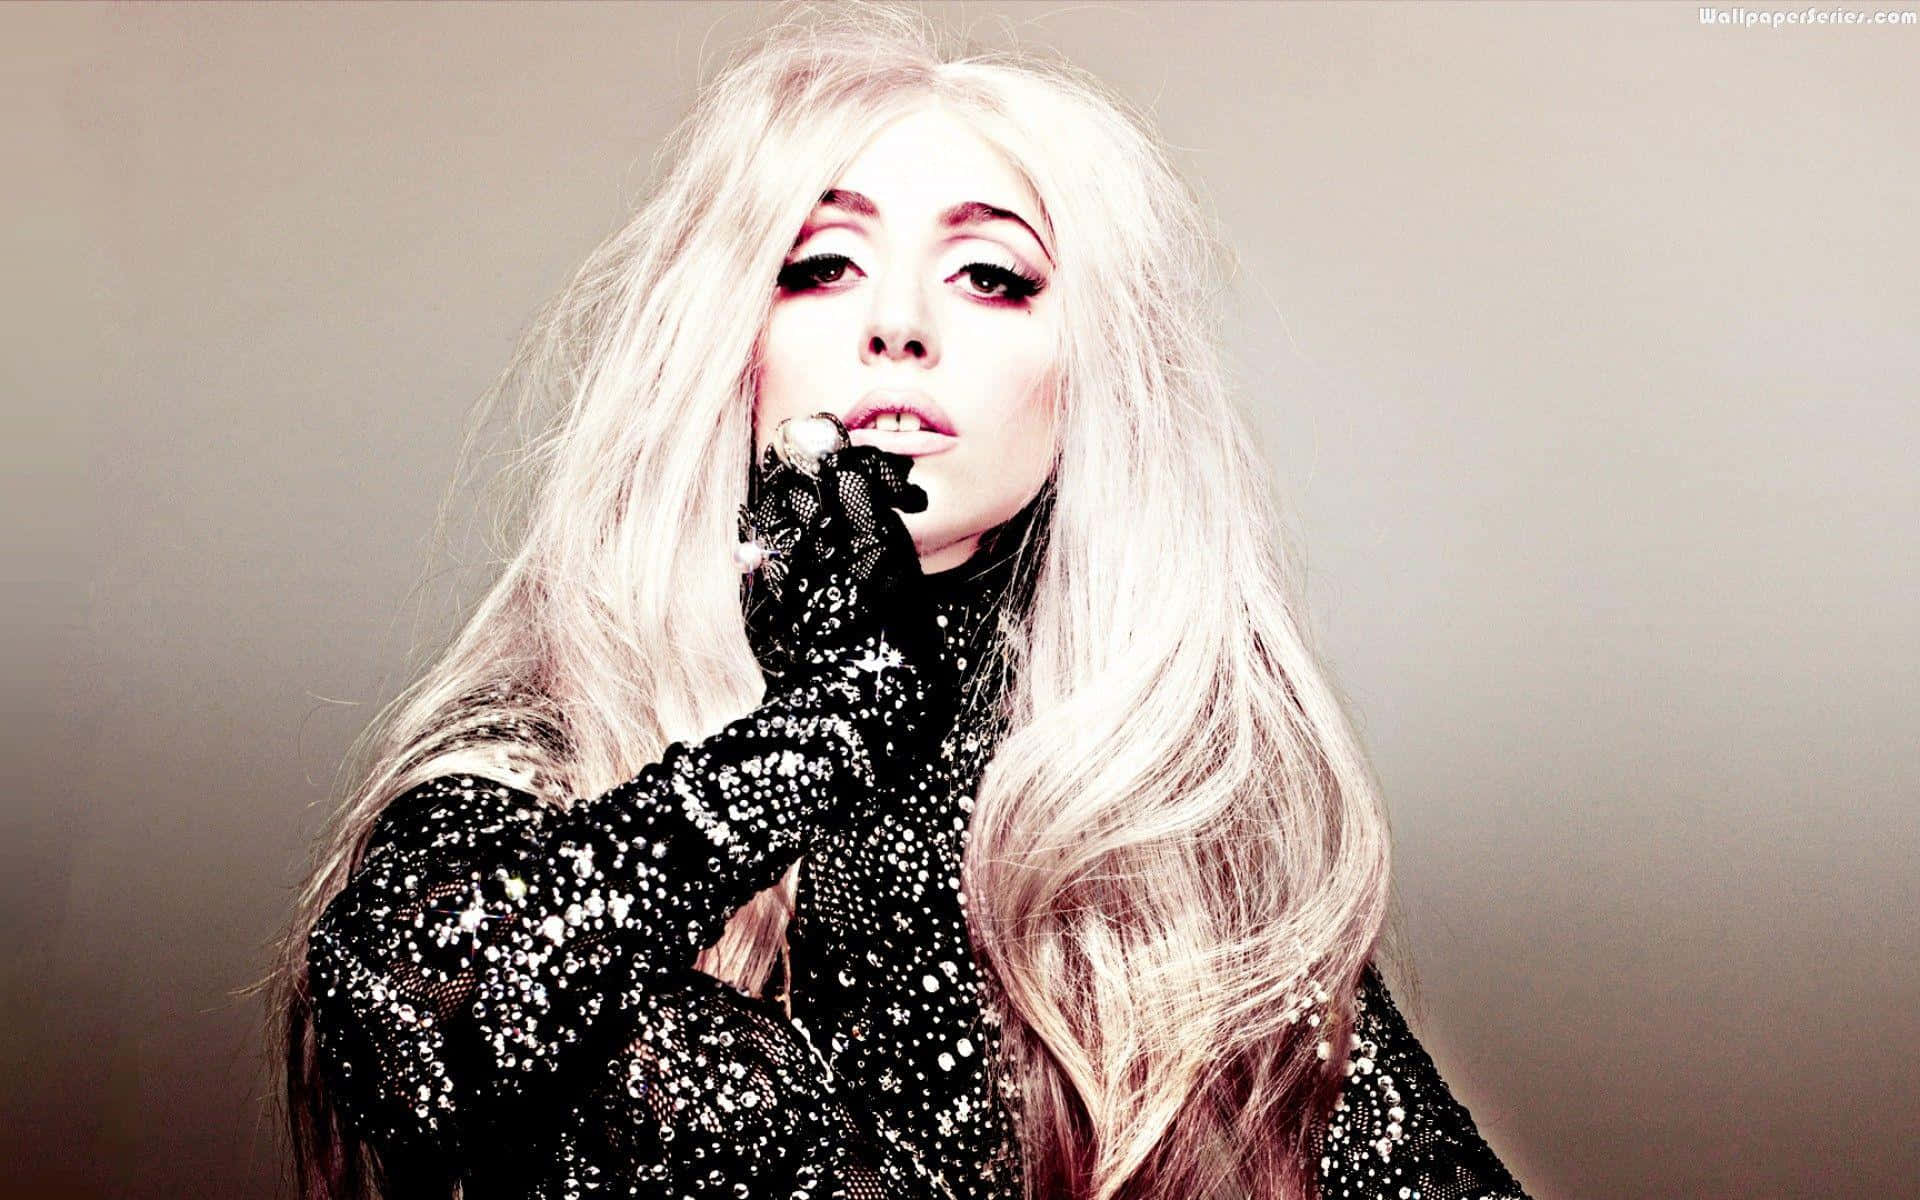 Lady Gaga as she appears in her latest music video